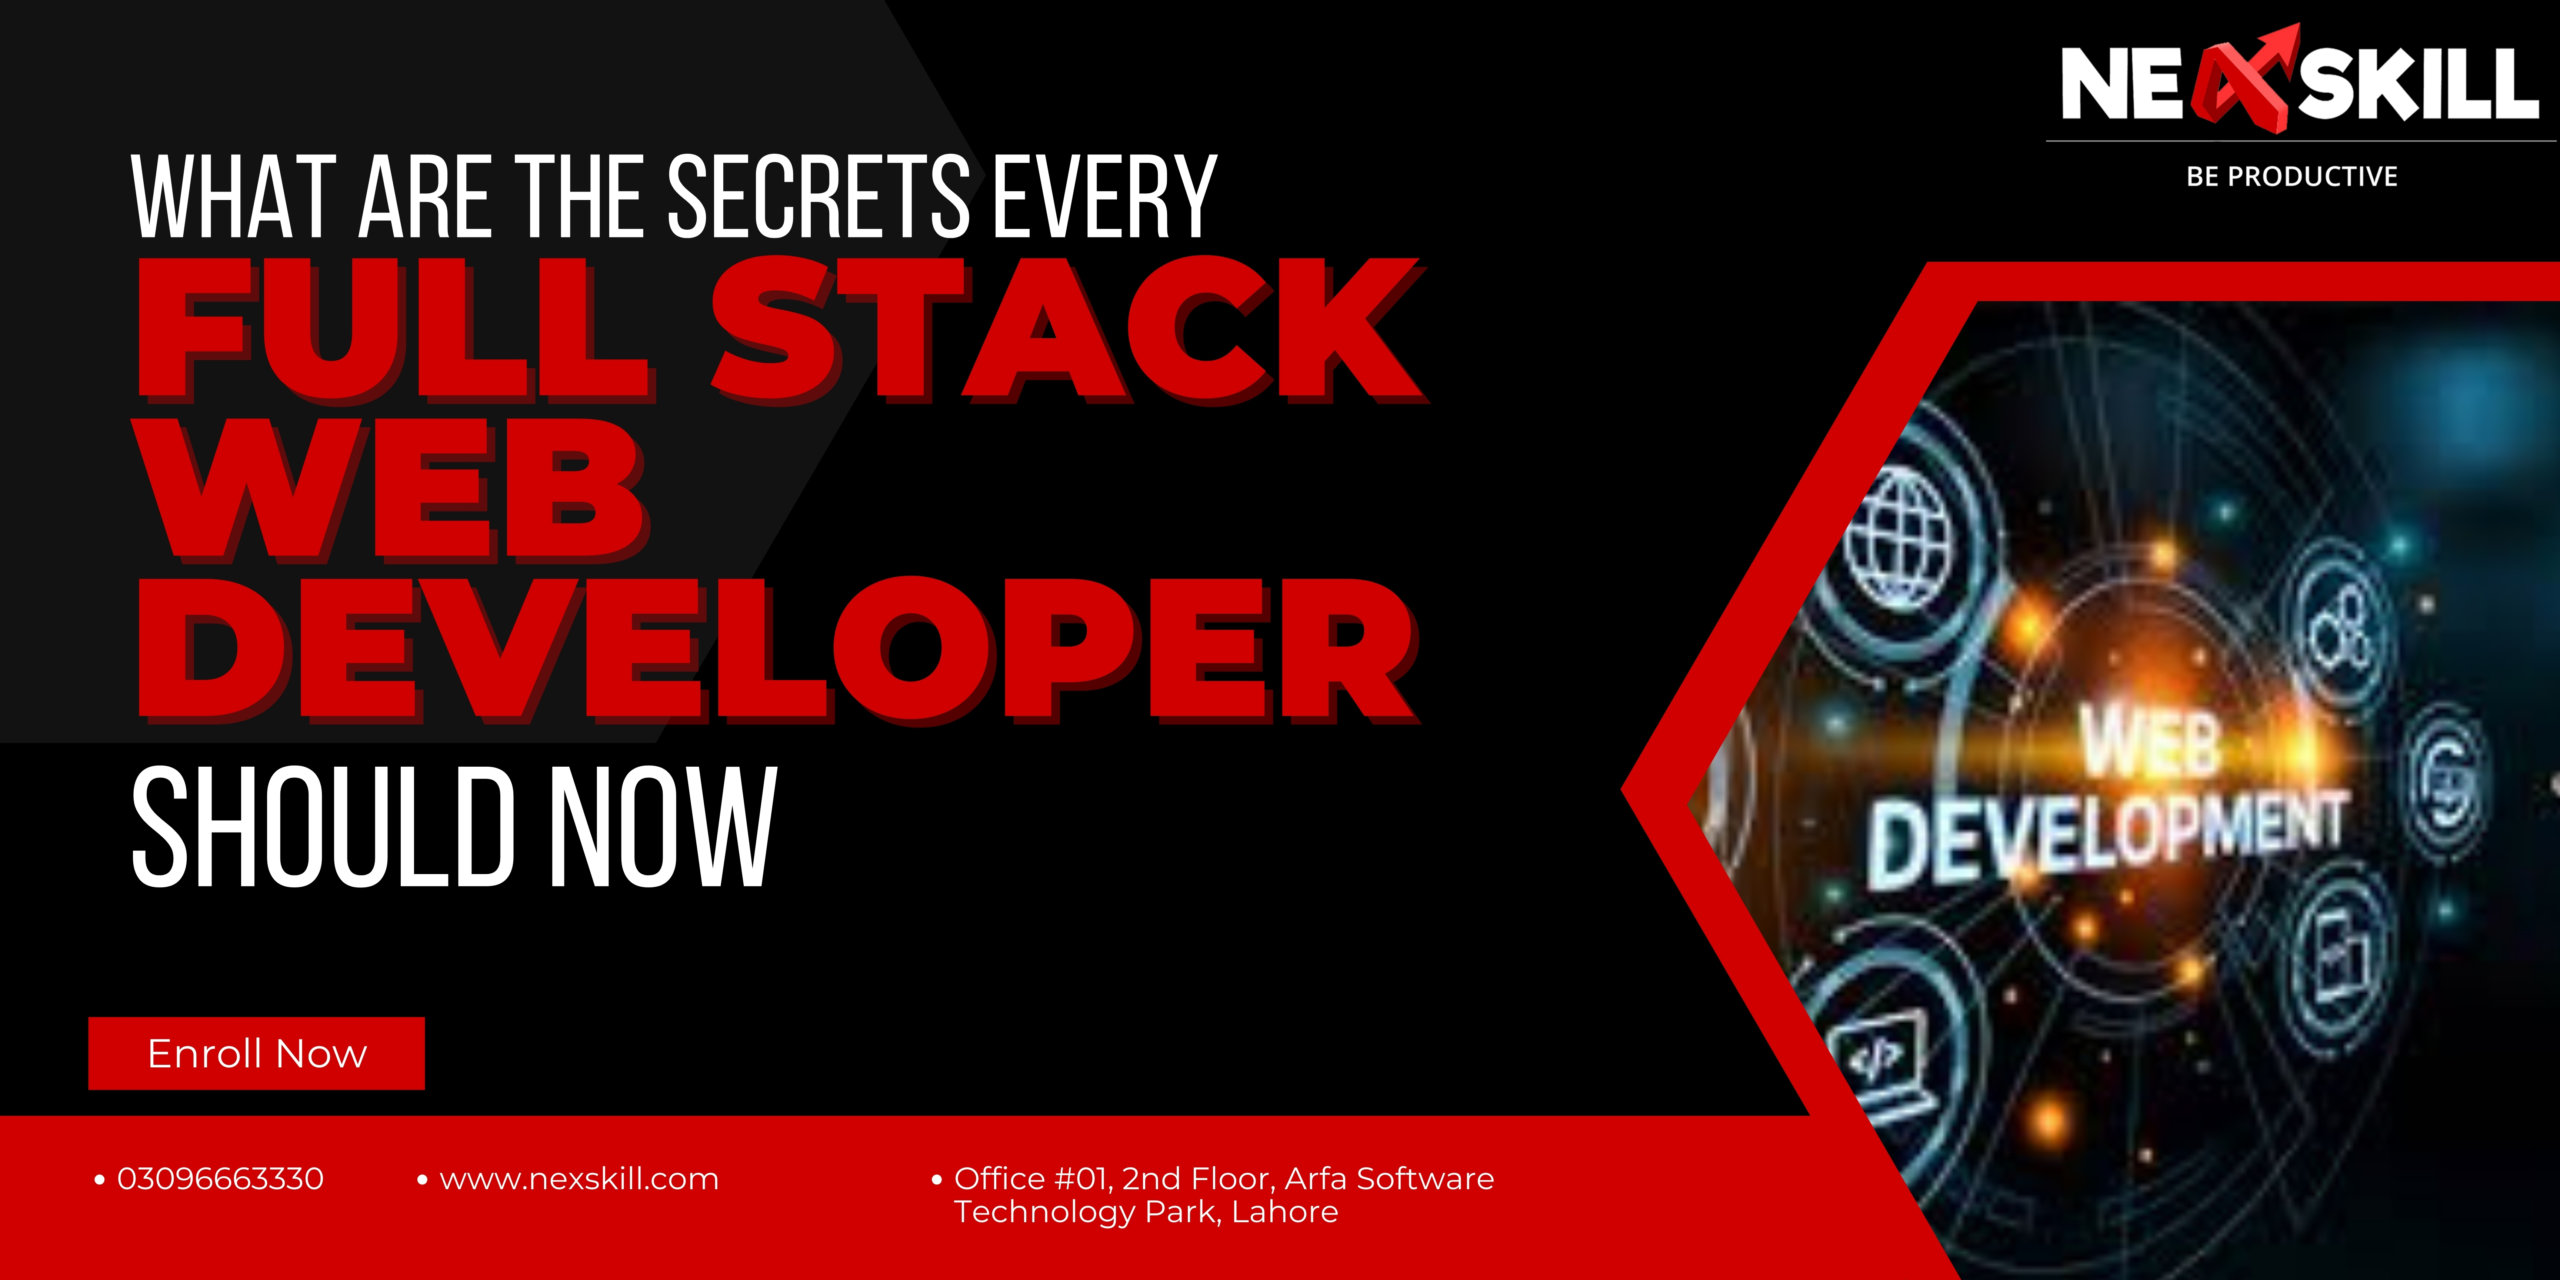 What are the Secrets Every Full Stack Web developer Should Know?